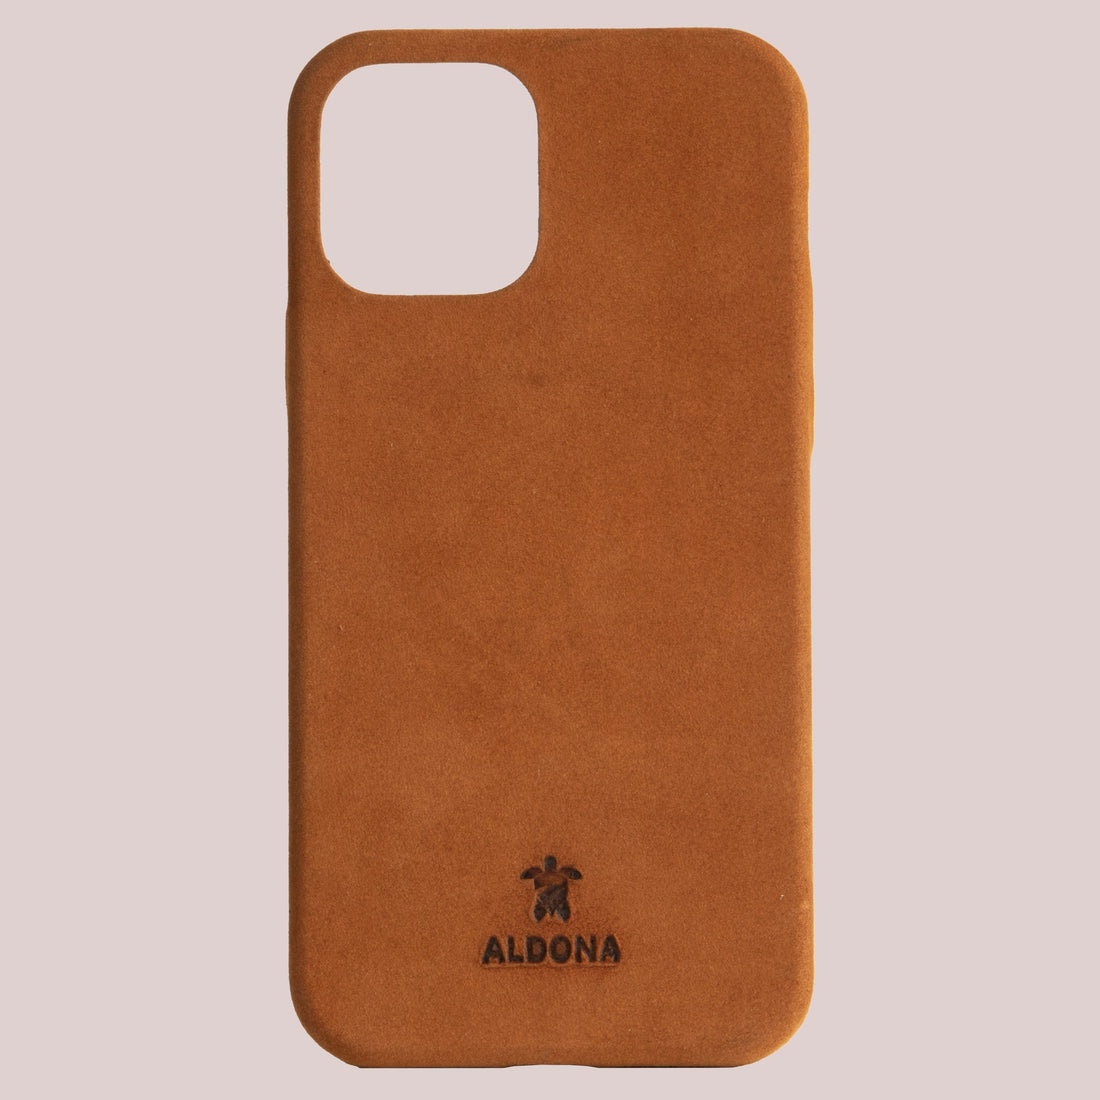 Kalon Case for iPhone 12 Pro Max with MagSafe Compatibility - Vintage Tan